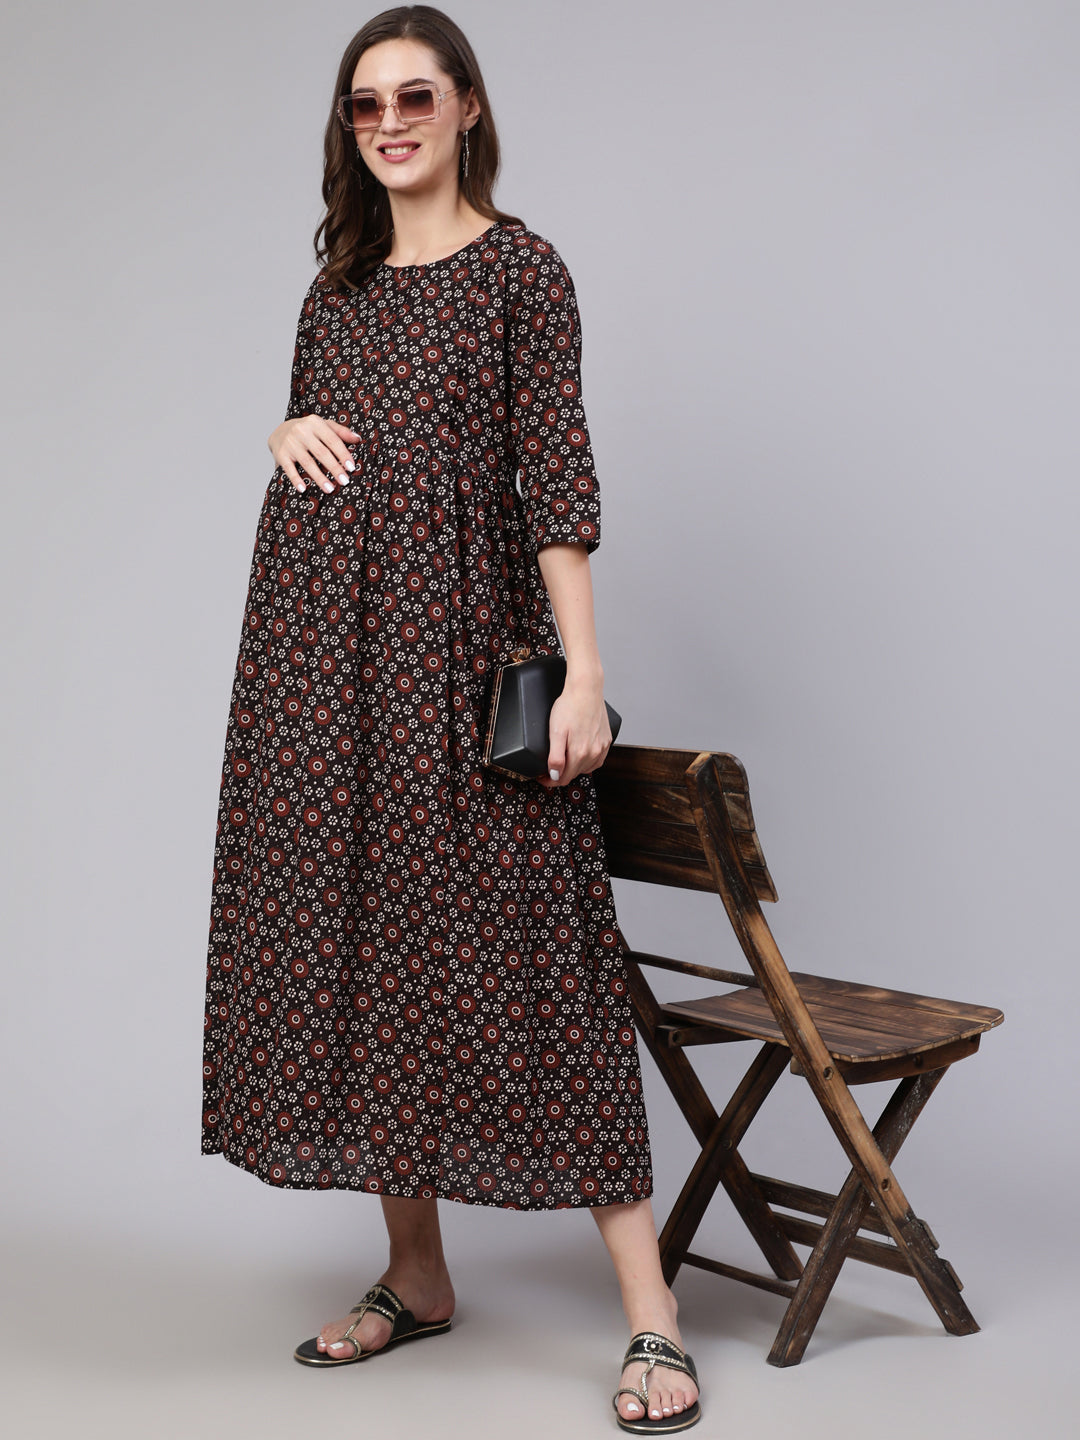 Women's Black Floral Printed Flared Maternity Dress - Nayo Clothing